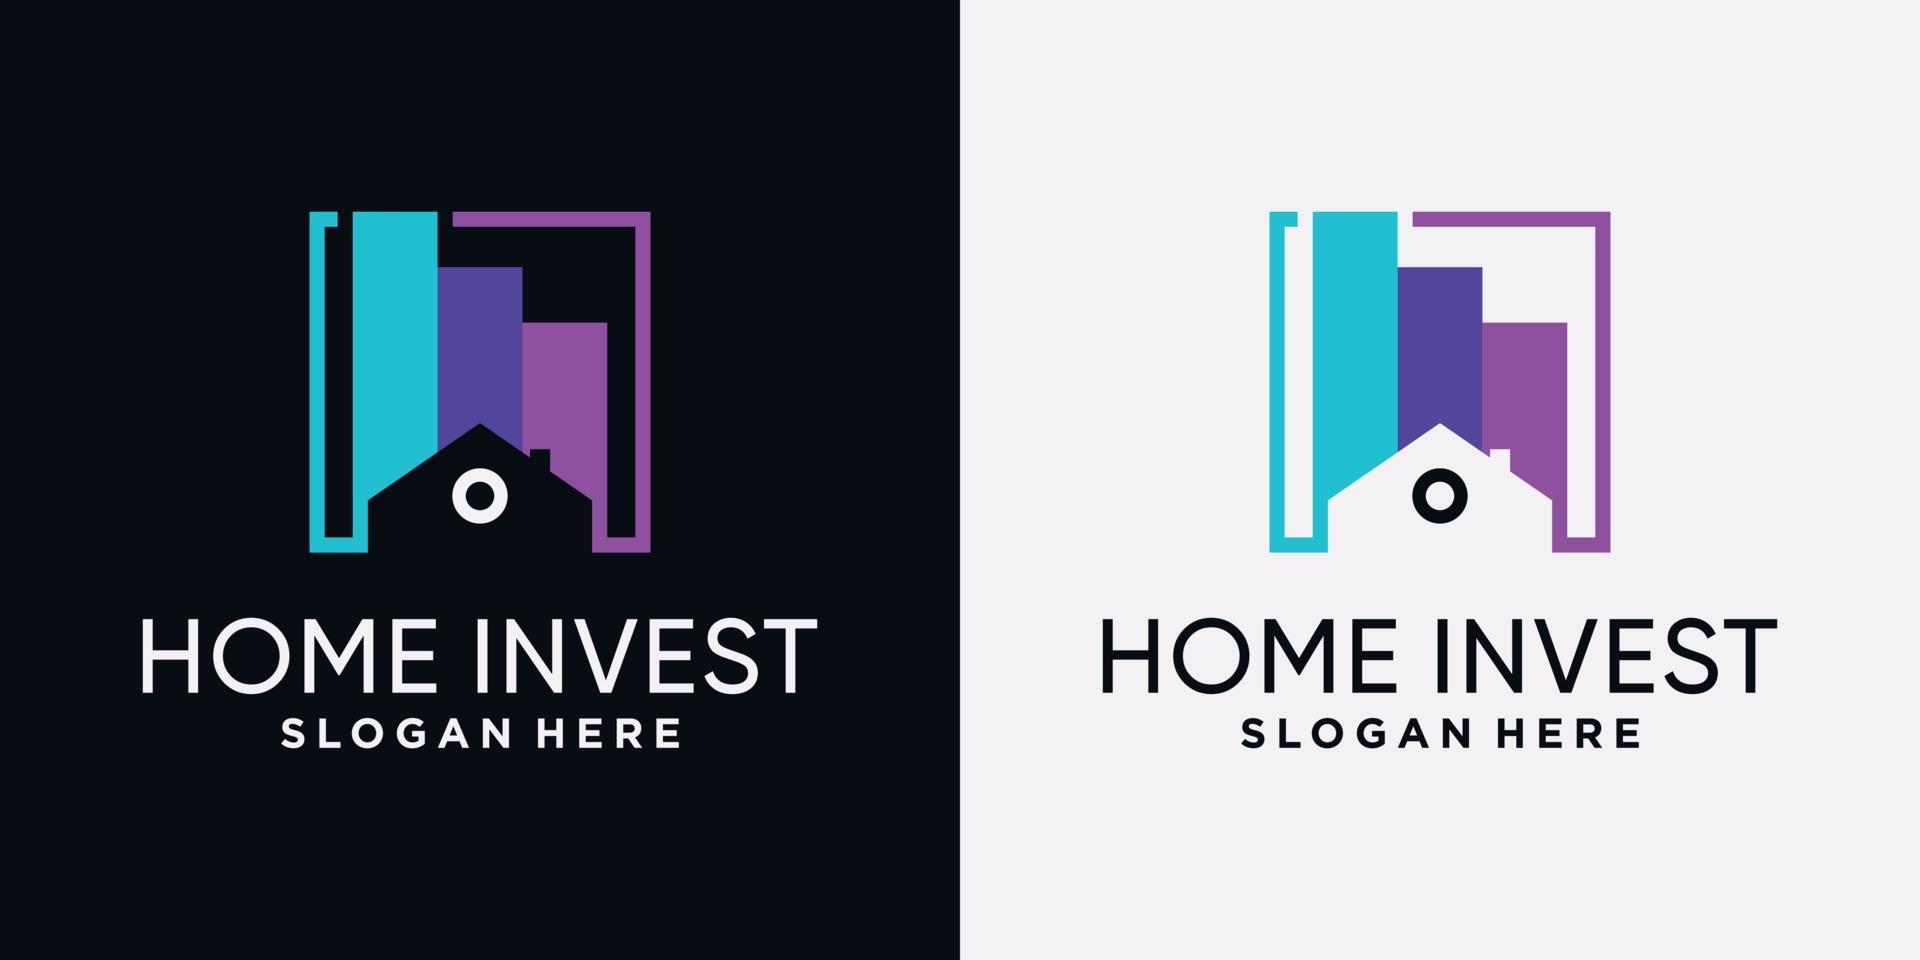 Home invest logo design template with creative concept vector